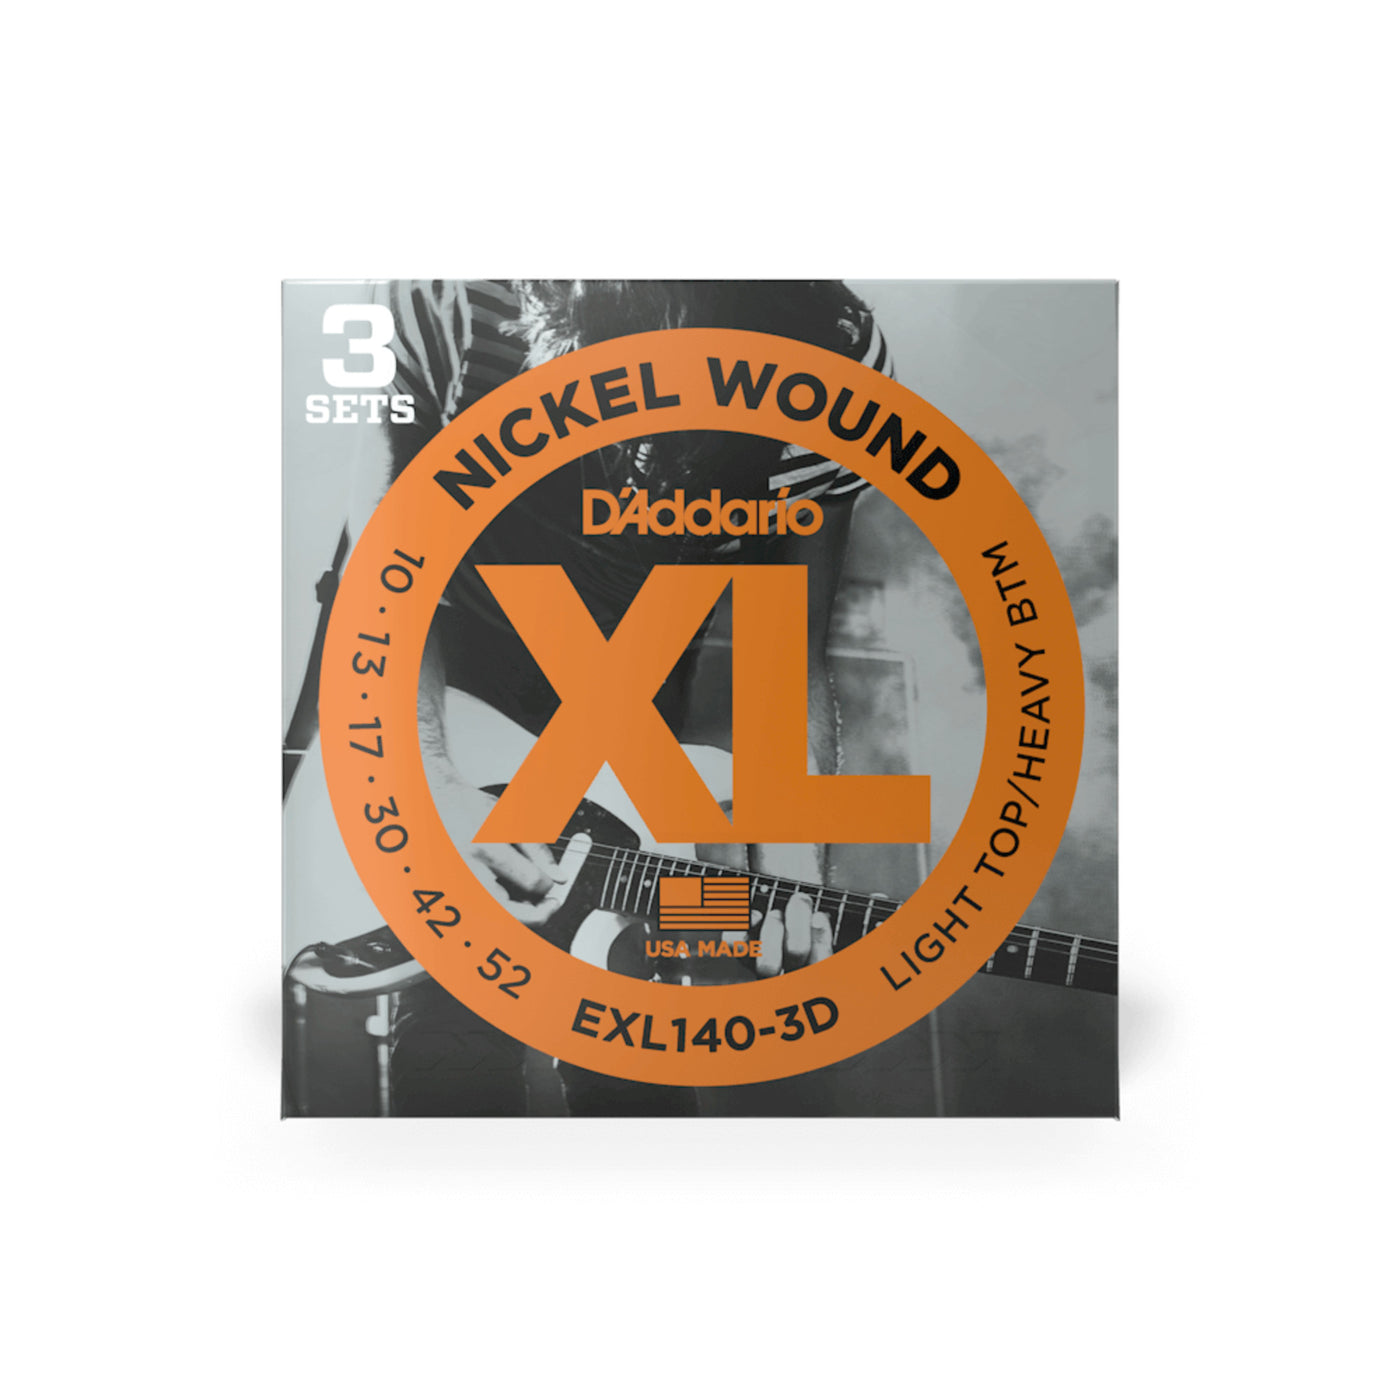 D'Addario Nickel Wound Electric Guitar Strings, Light Top/Heavy Bottom, 10-52, 3 sets (EXL140-3D)